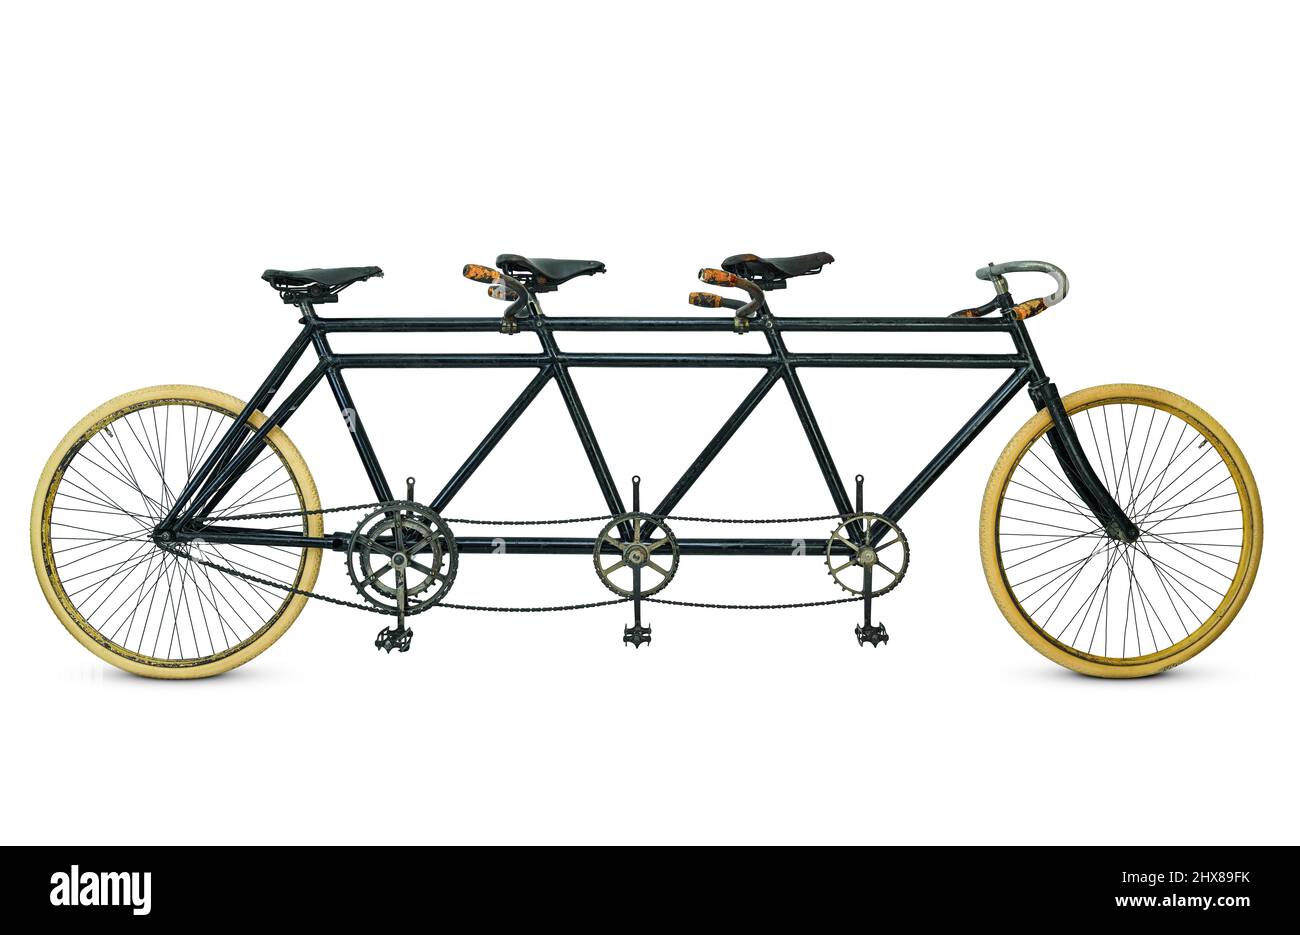 Adler Triplet, Frankfurt, Germany, 1897, side view, drive side. Number of gears: 0 Steel frame Wheel : 28' Special features: extra strong chains, but relatively light Stock Photo